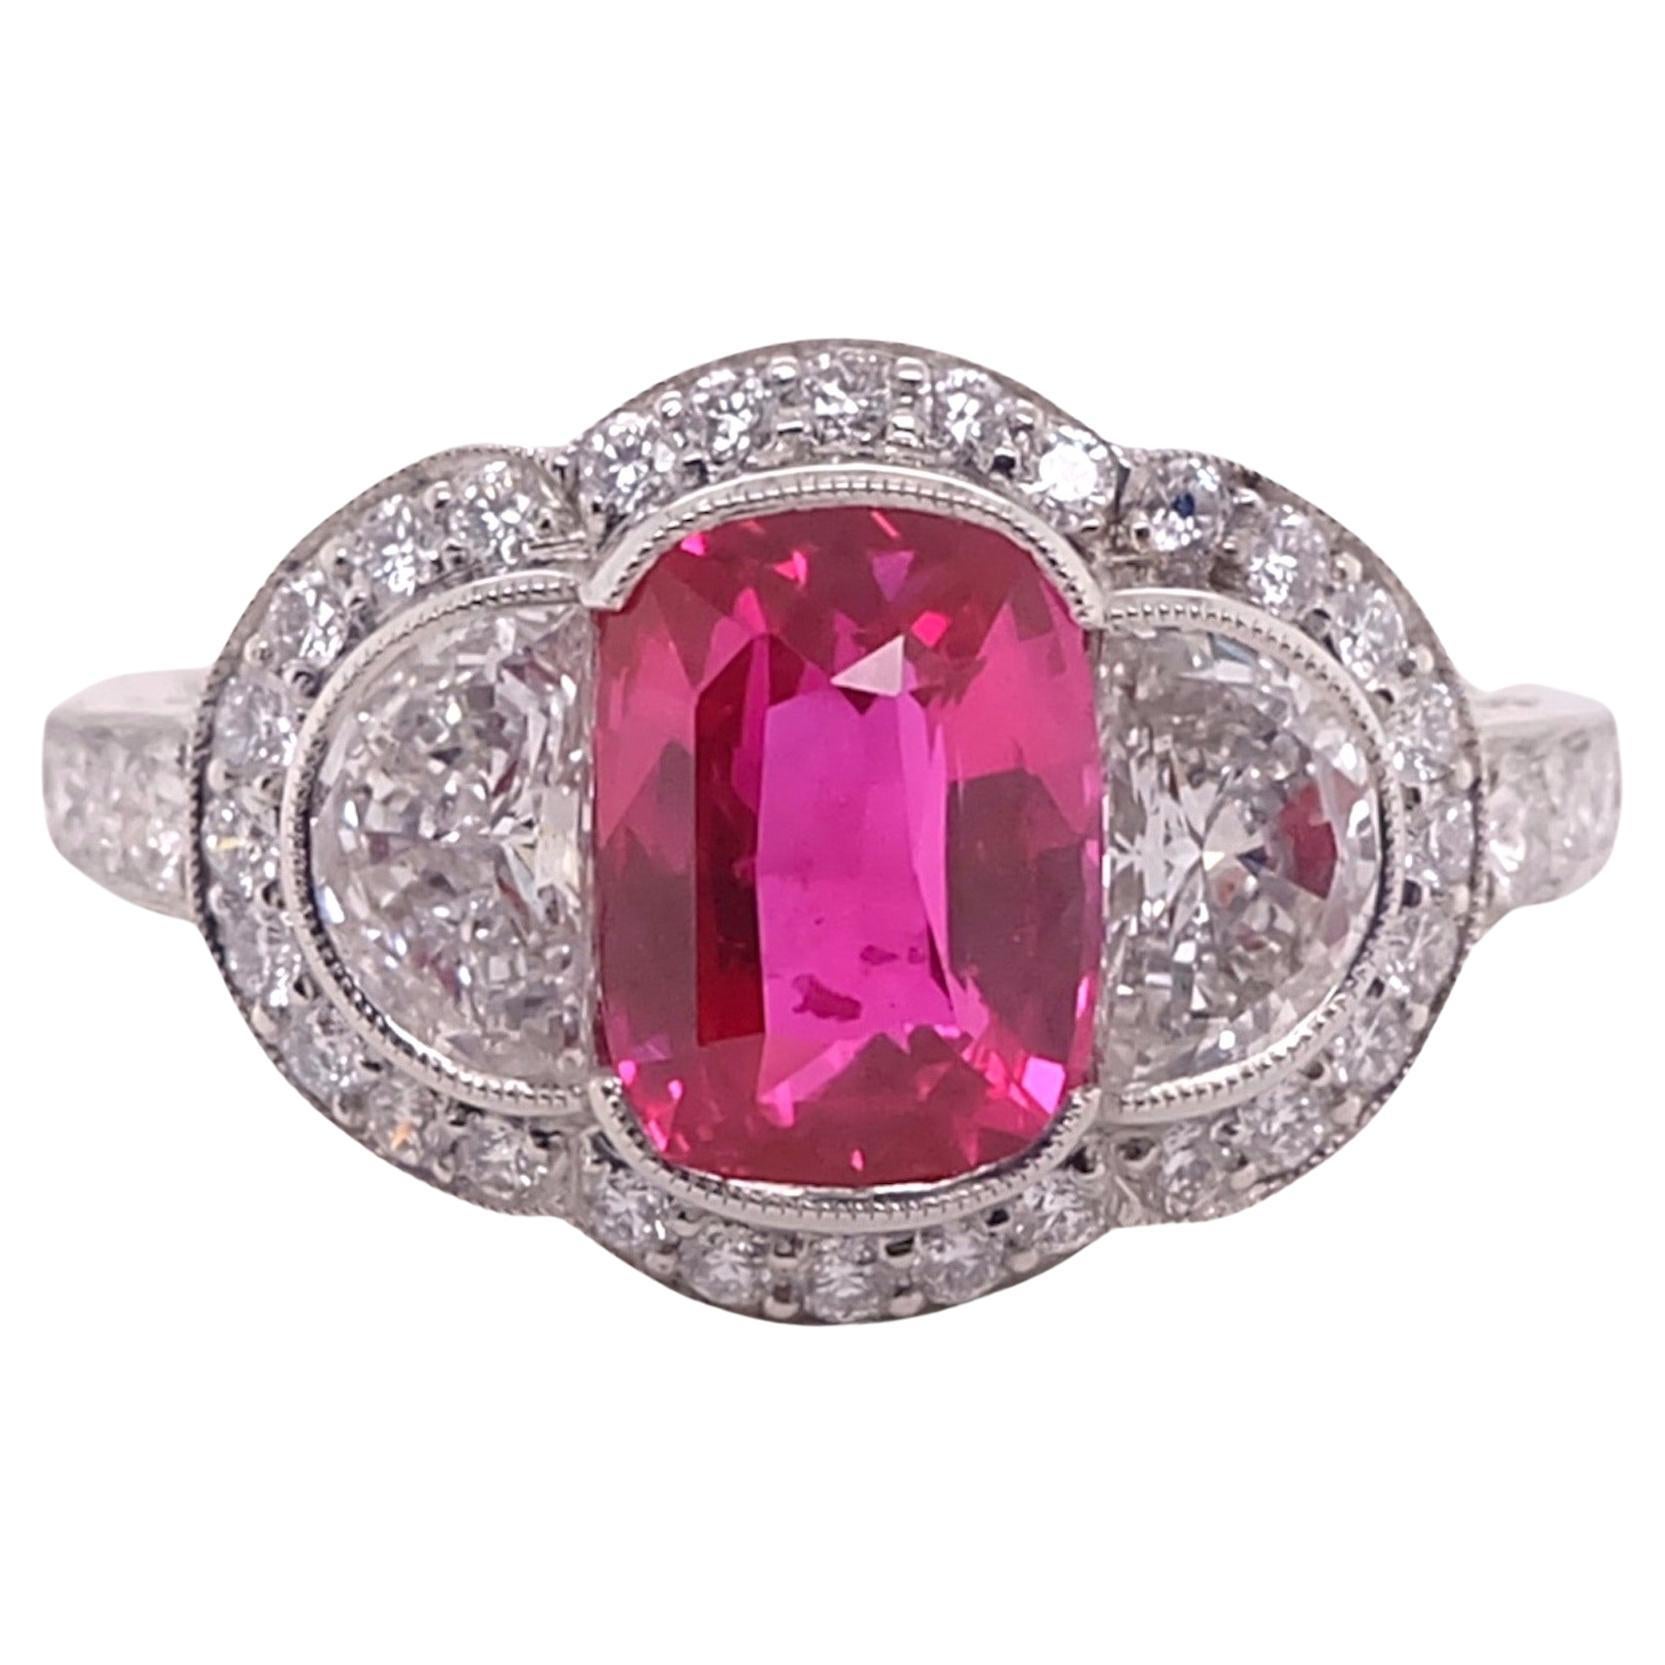 Sophia D, GIA Certified 2.06 Carat Ruby and 0.68 Carat Diamond Ring in Platinum For Sale